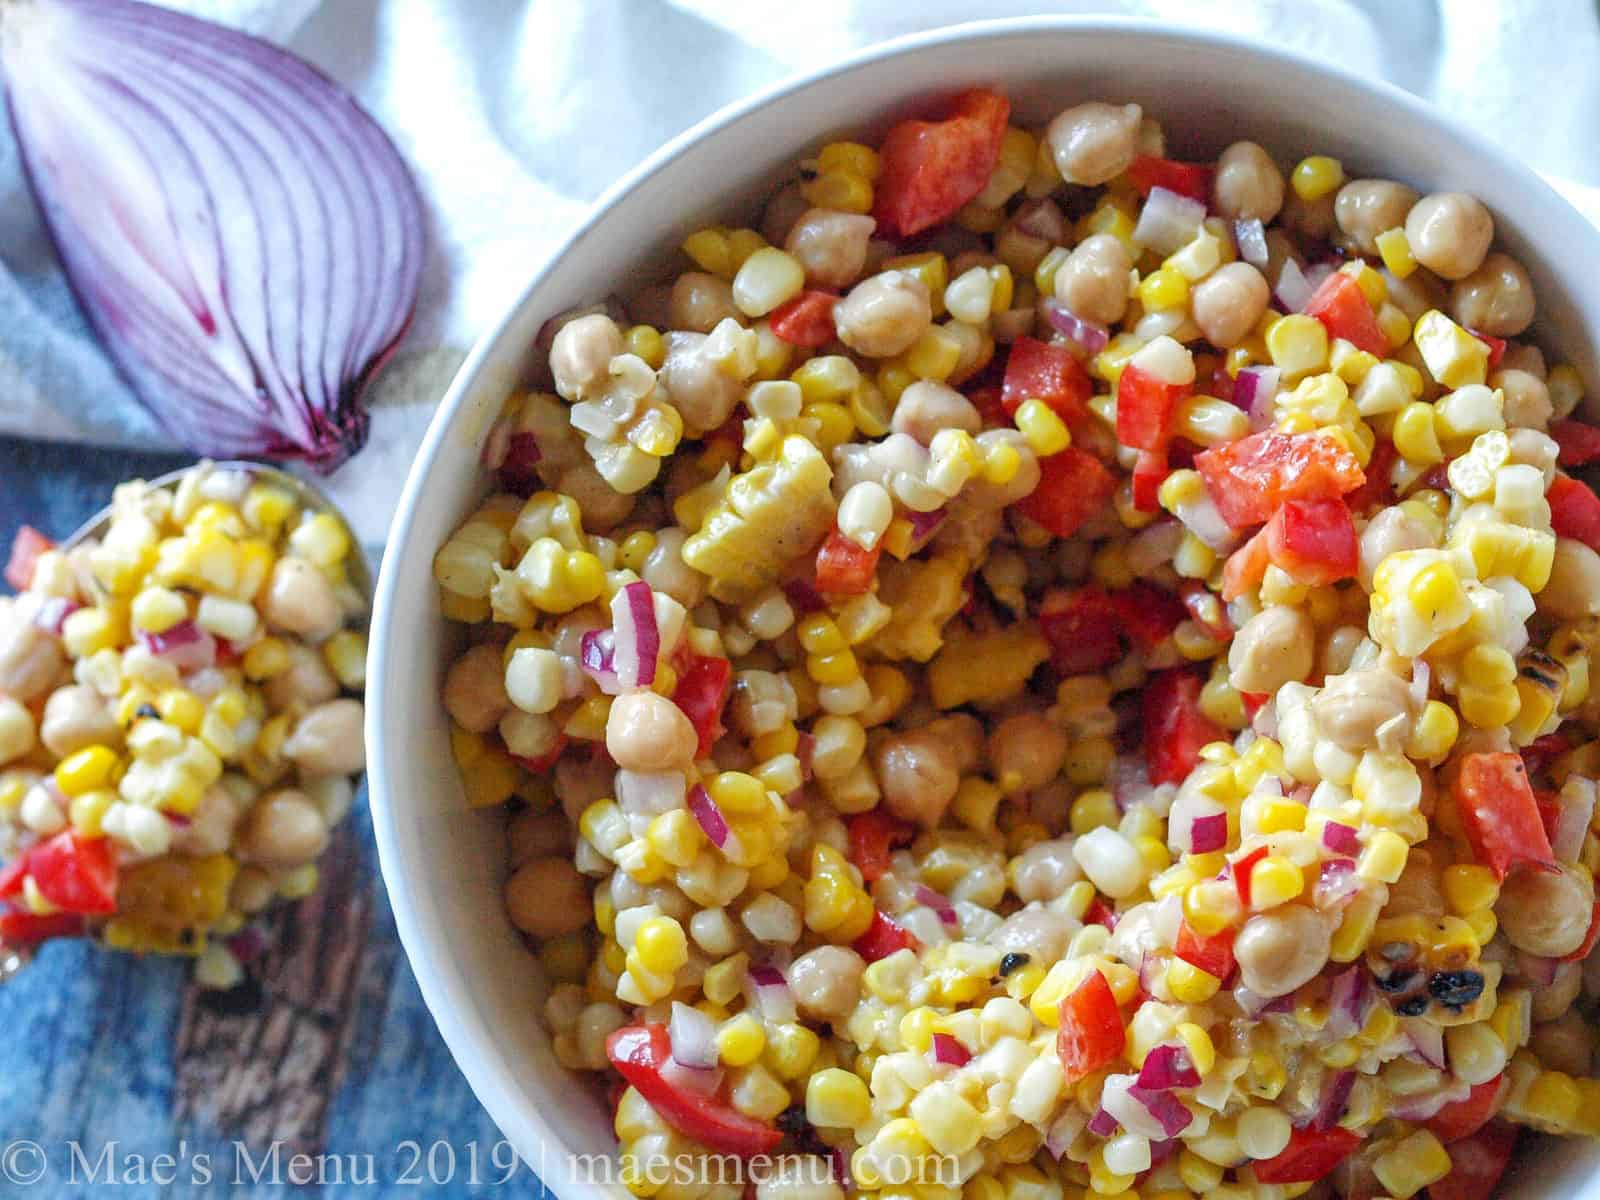 Large white bowl of Chickpea & Grilled Corn Salad with Roasted Garlic Salad Dressing.